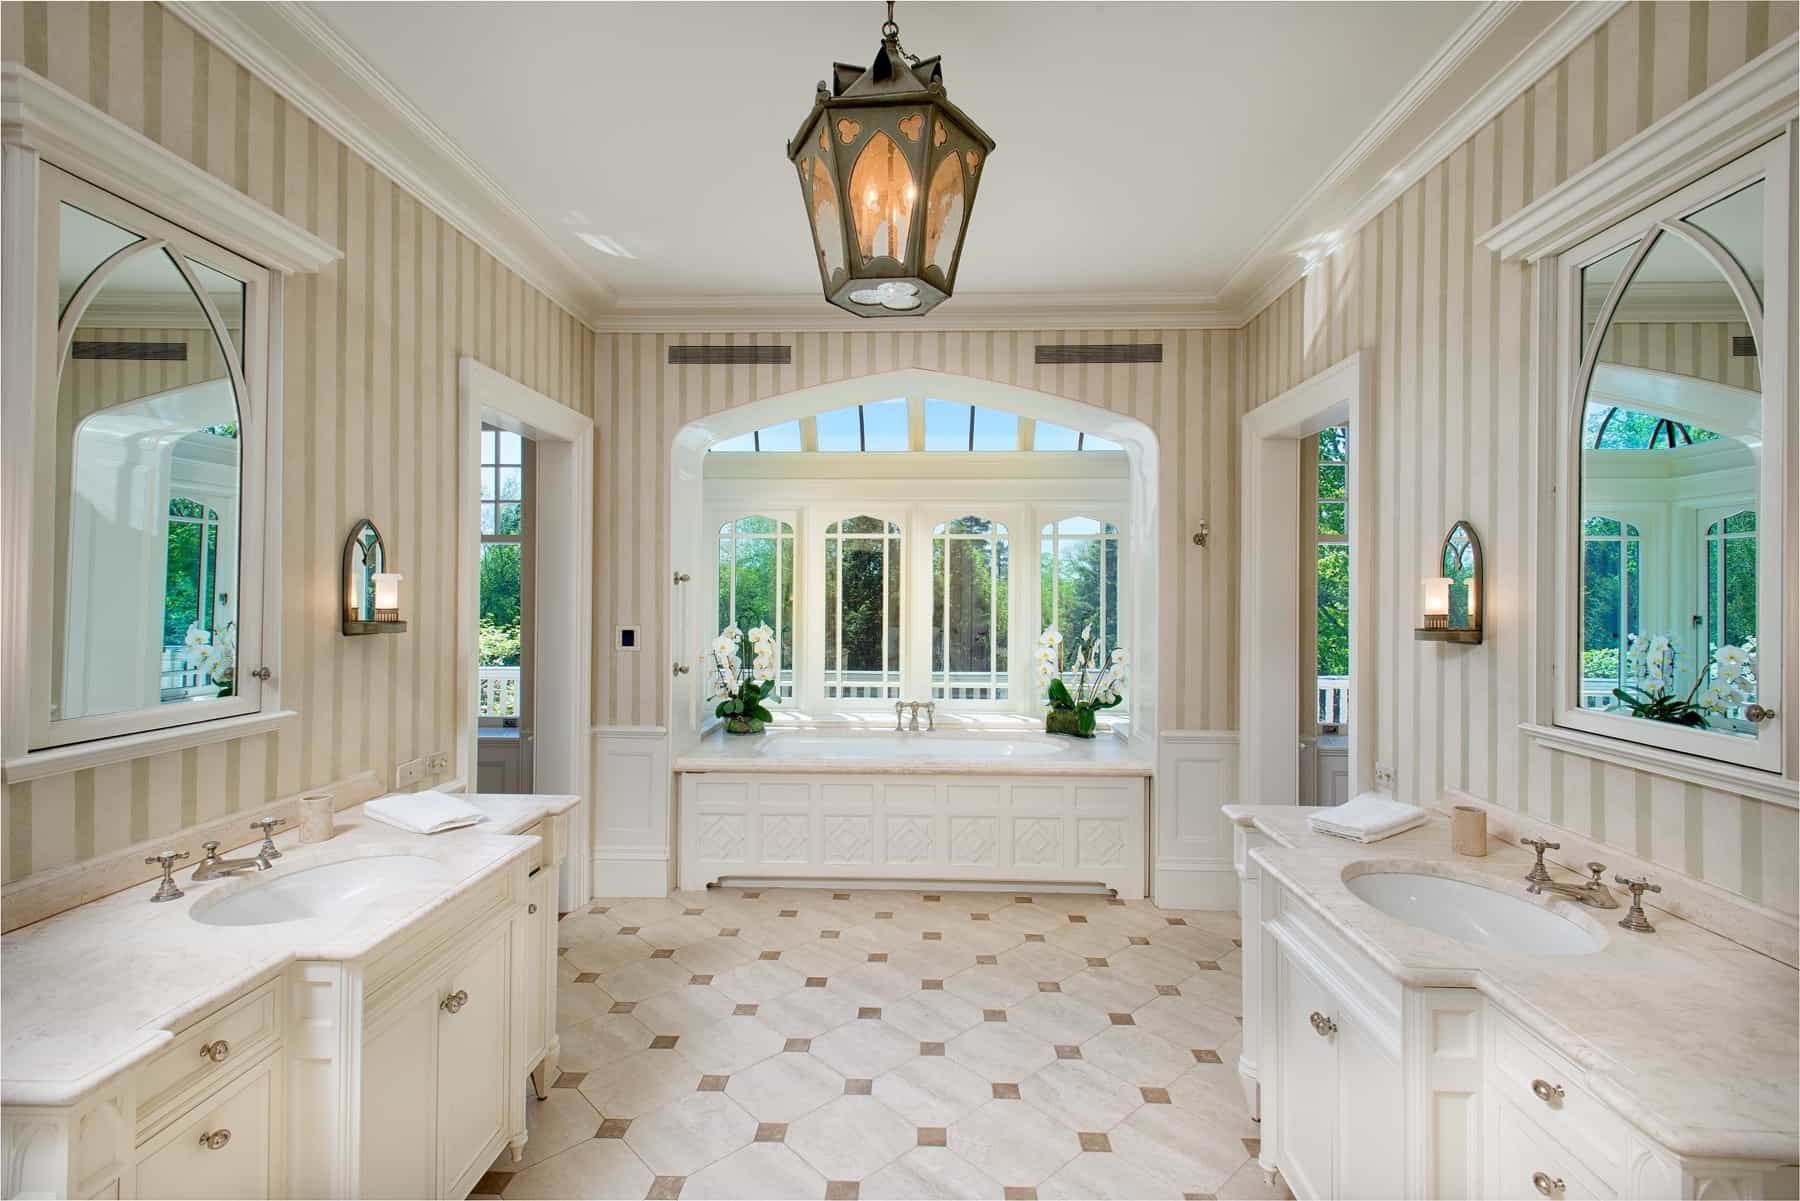 Geometric Floor Tile For Cottage Neutral Bathroom With ...